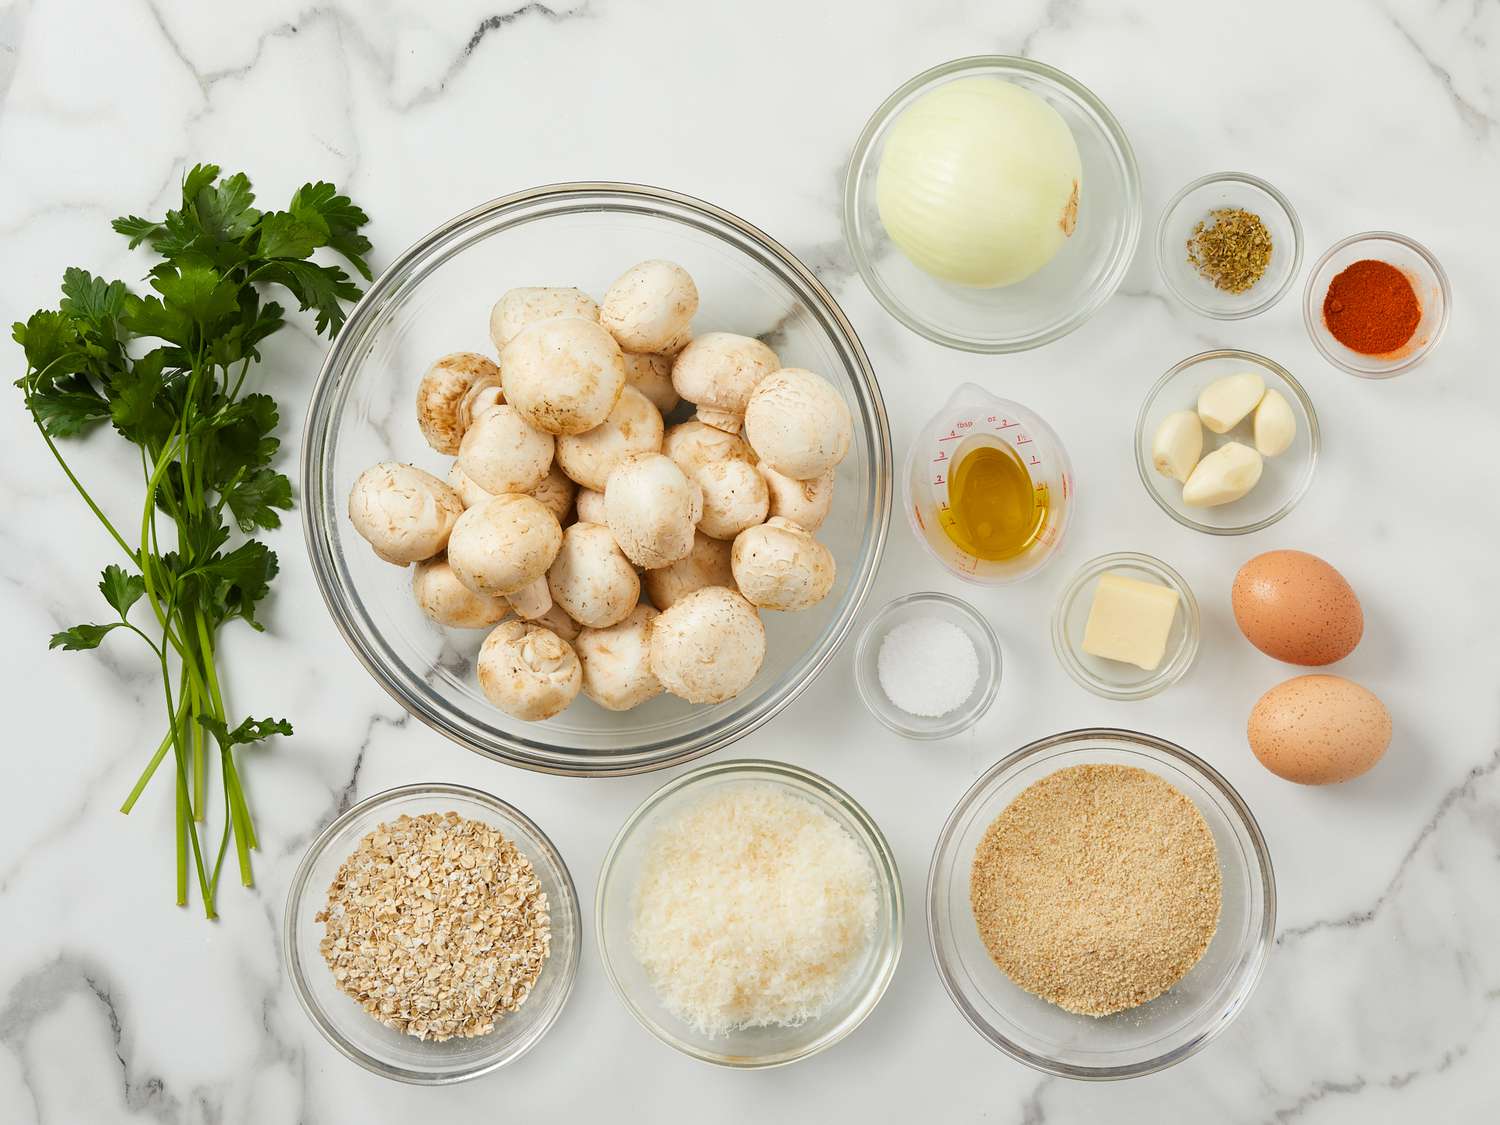 A top down view of ingredients gathered to make meatless meatballs.